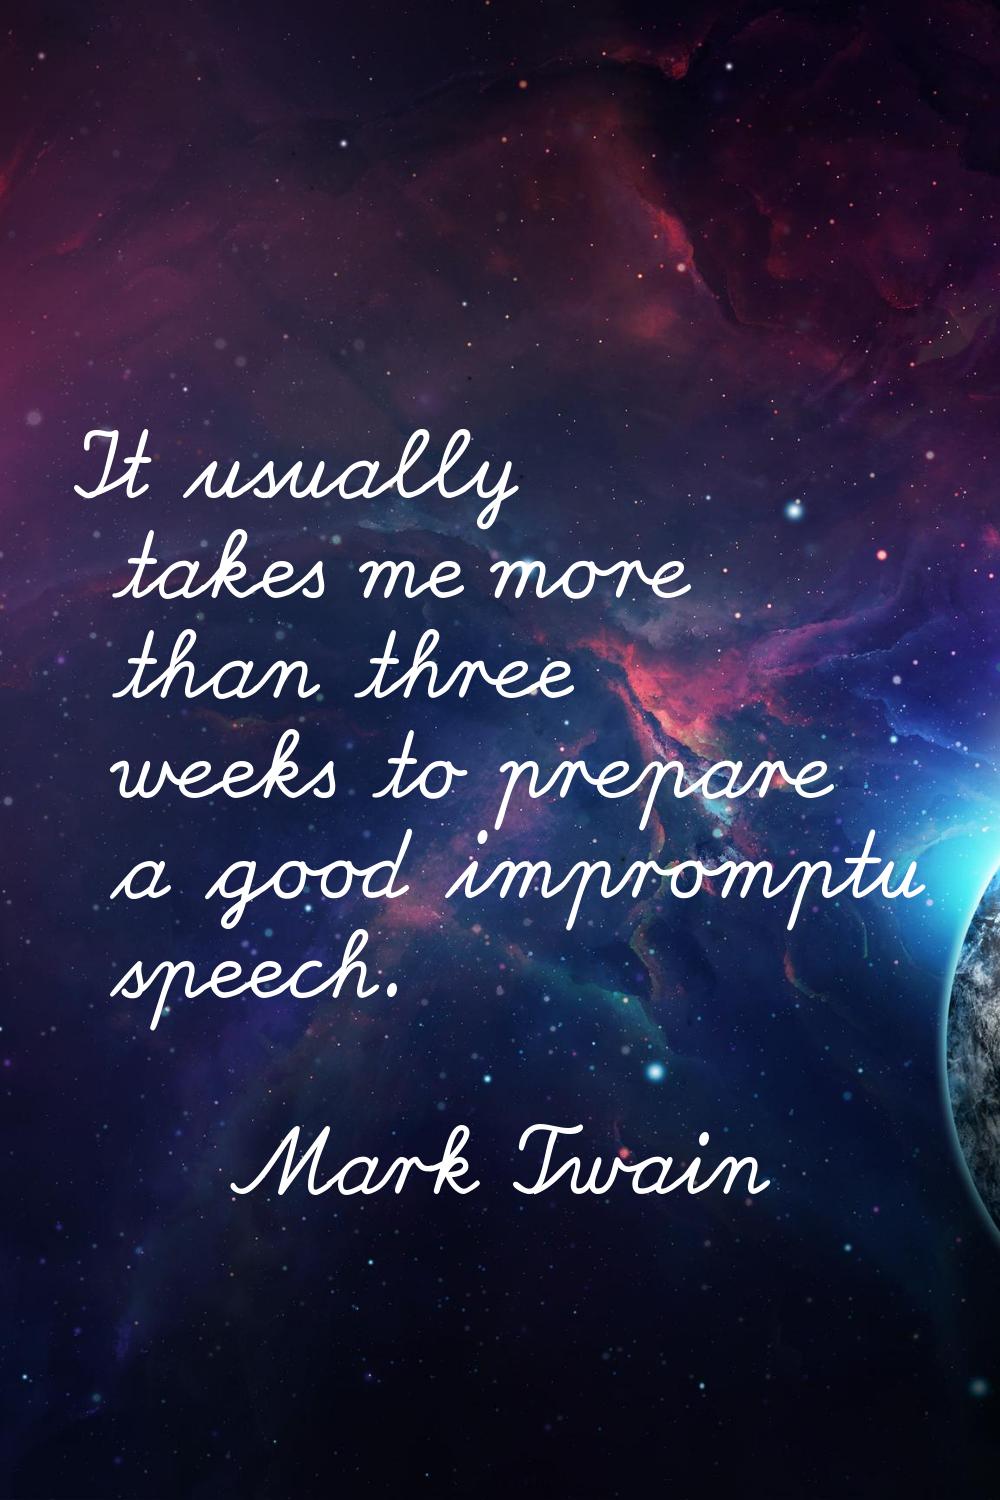 It usually takes me more than three weeks to prepare a good impromptu speech.